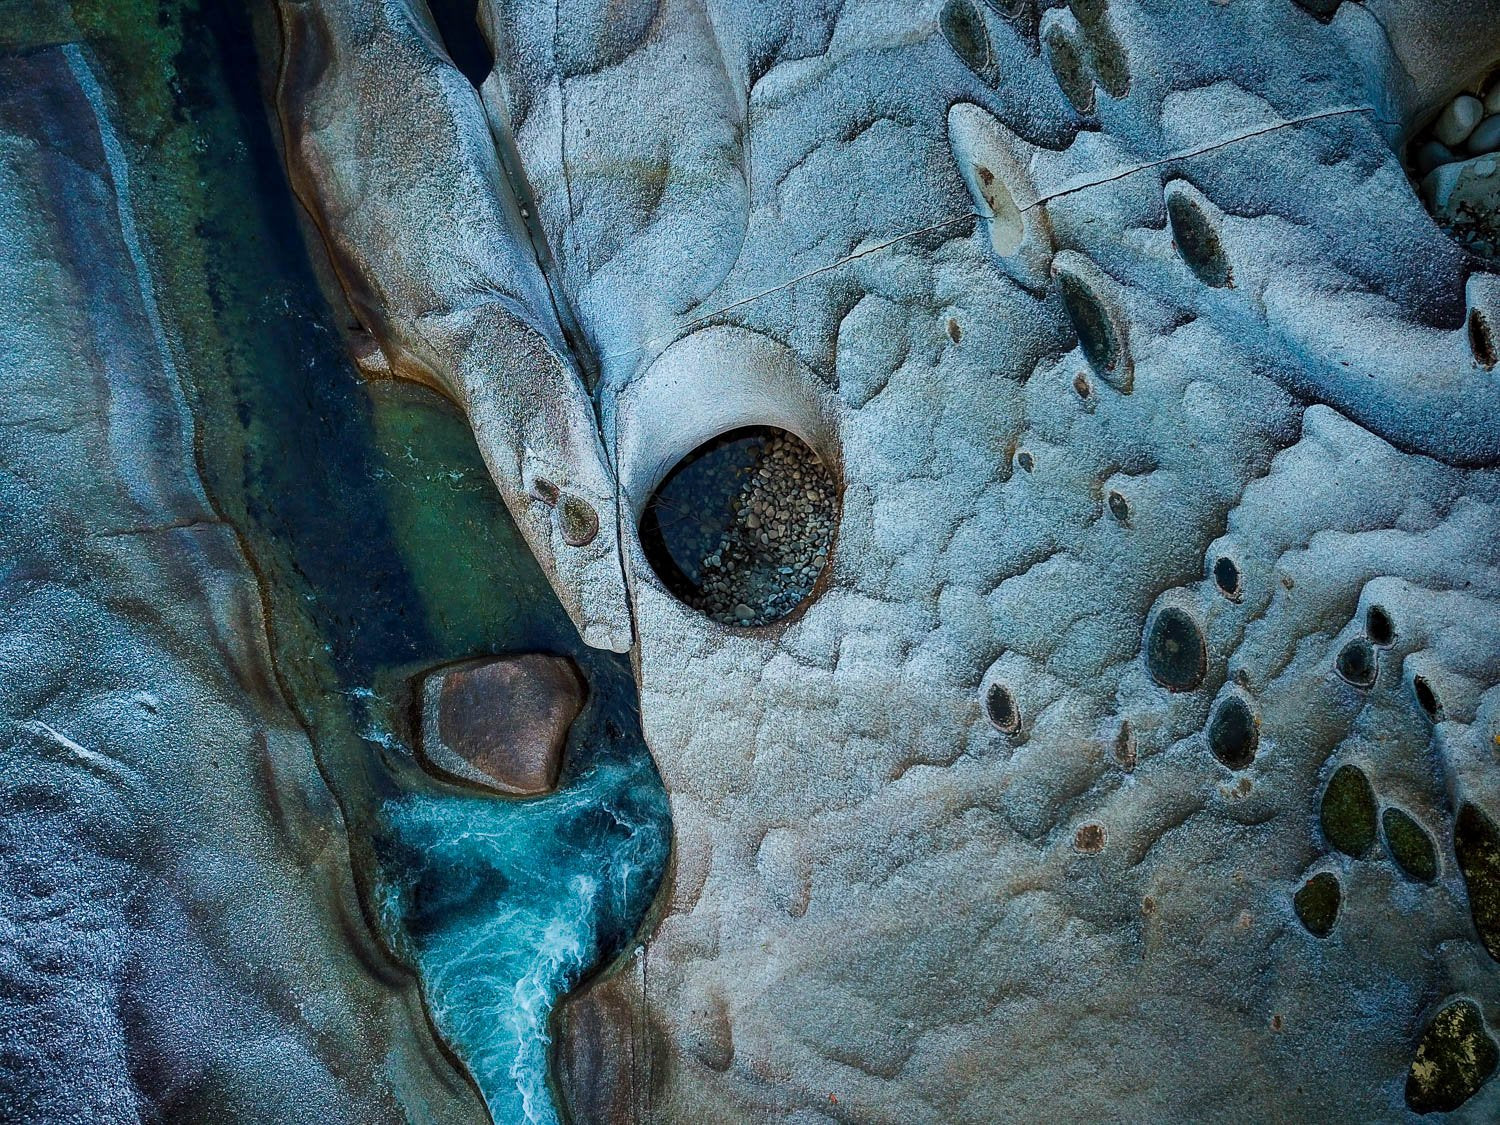 A weird texture of giant boulders having smoky and aqua colors, with some cracking texture on the surface, Babinda Boulders from above, Far North Queensland 